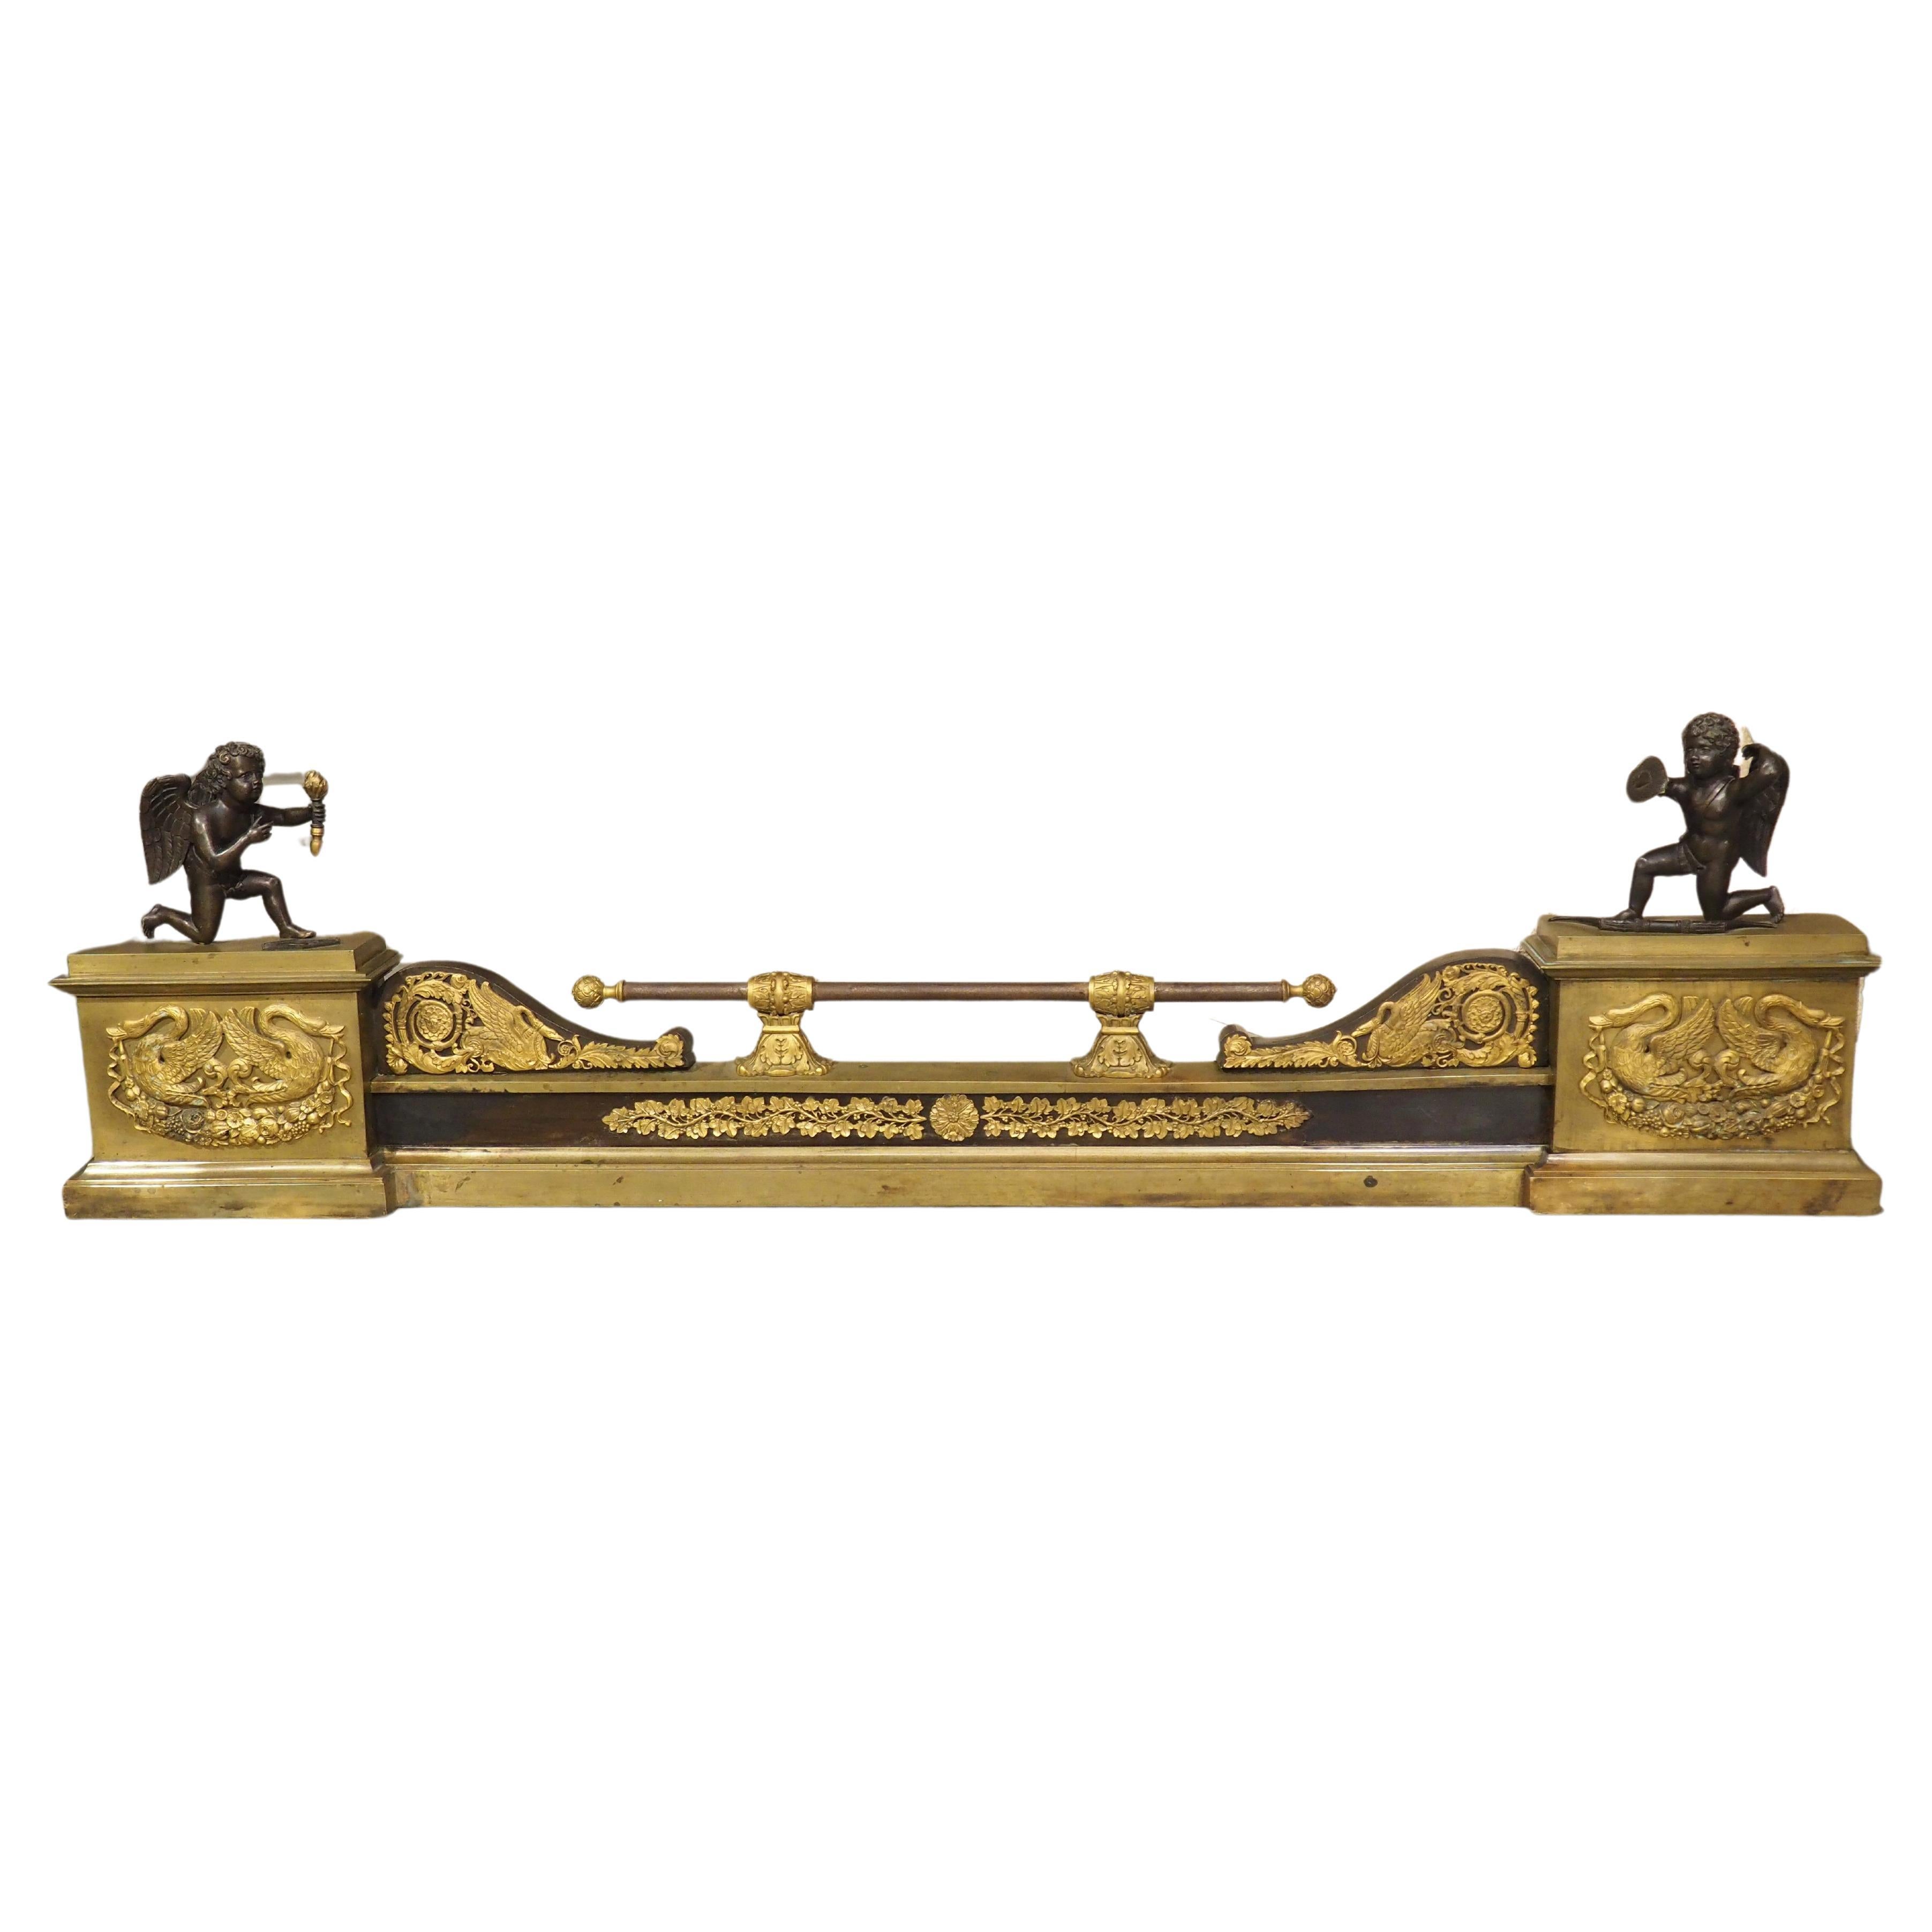 Period French Empire Patinated and Gilt Bronze Fireplace Fender, Circa 1815 For Sale